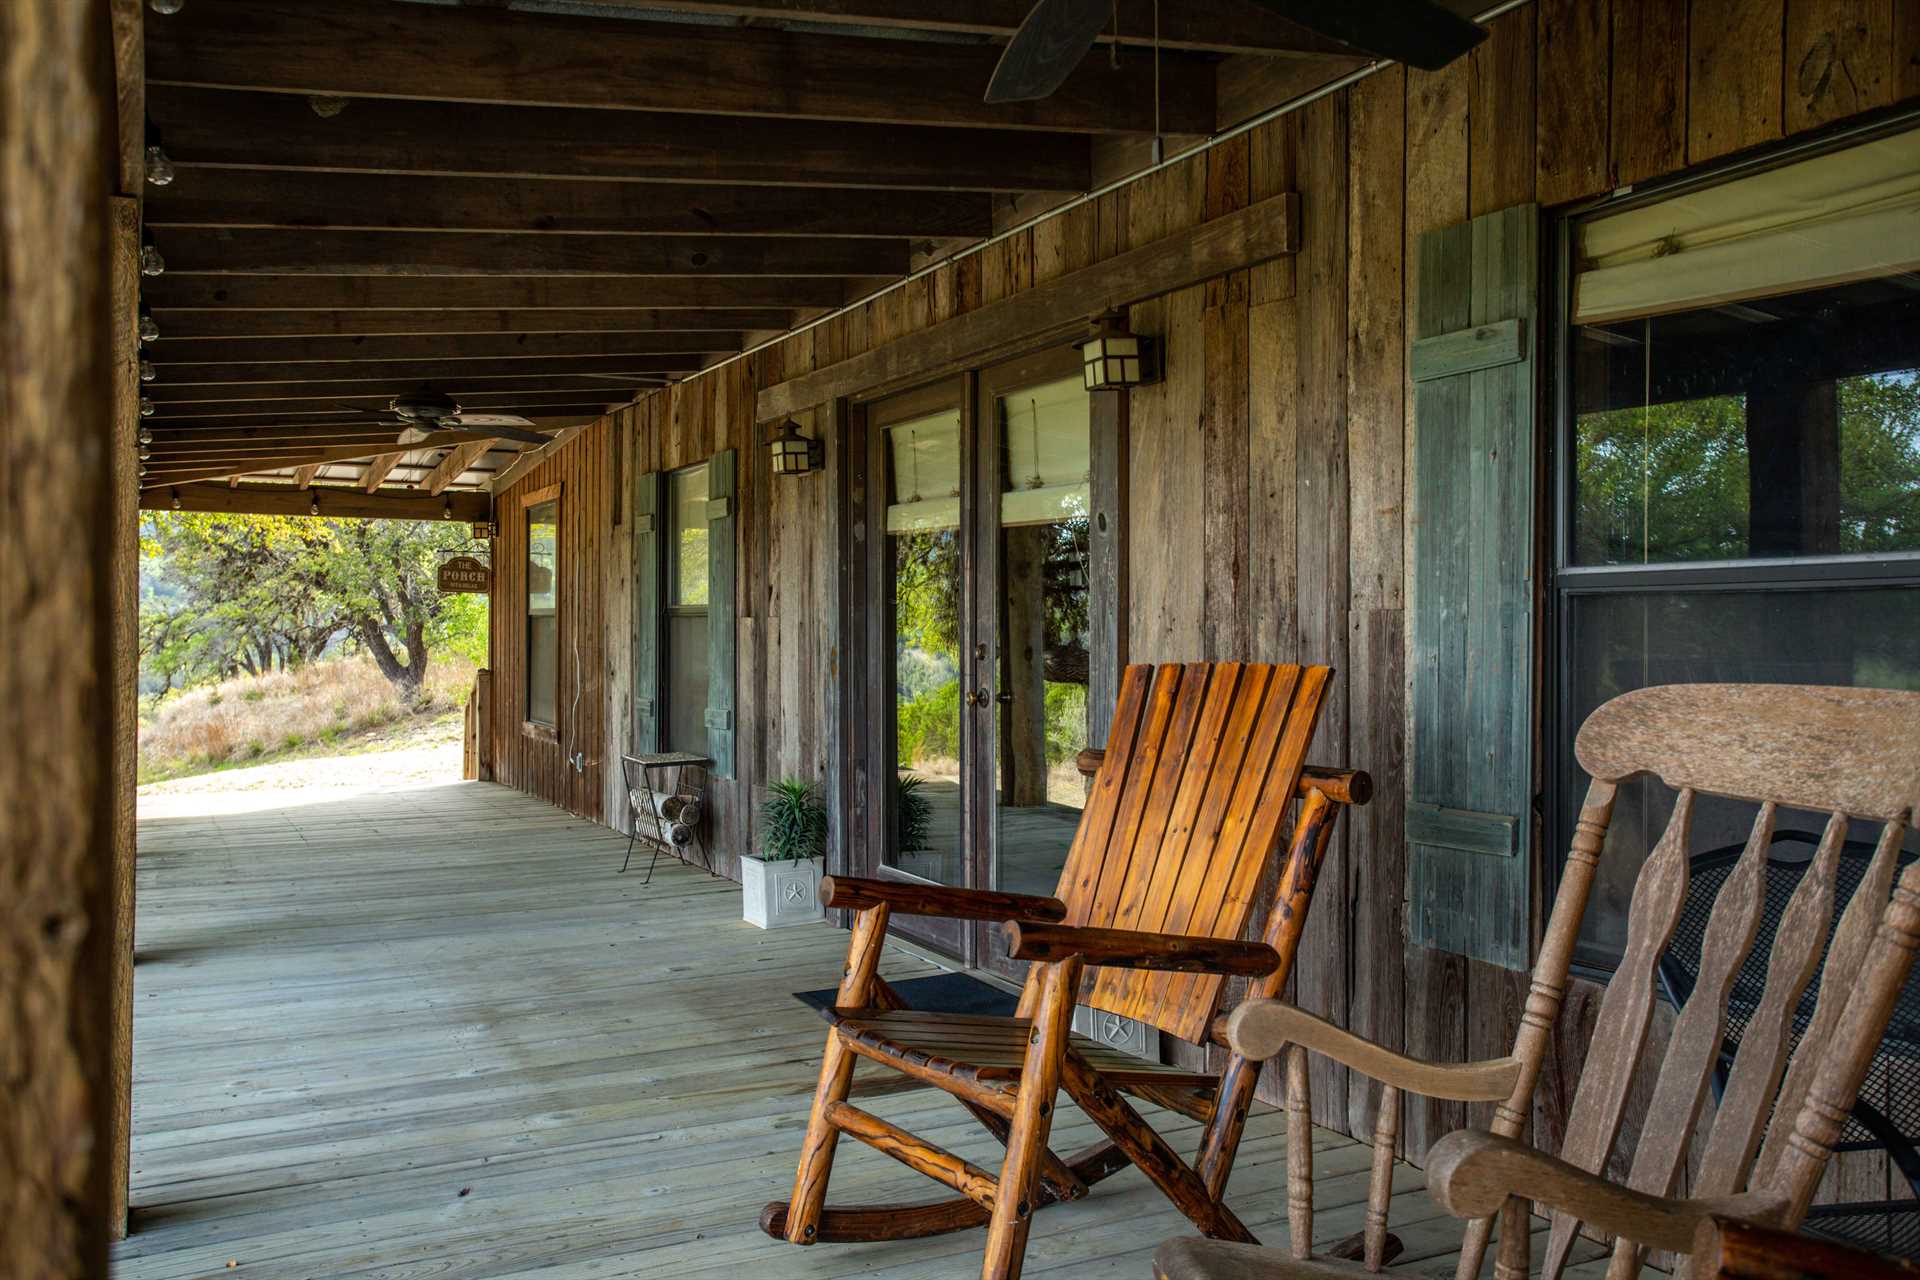                                                 Amble on up to the Medina Mountain Retreat! See why so many of our guests love to call it their Hill Country home away from home.